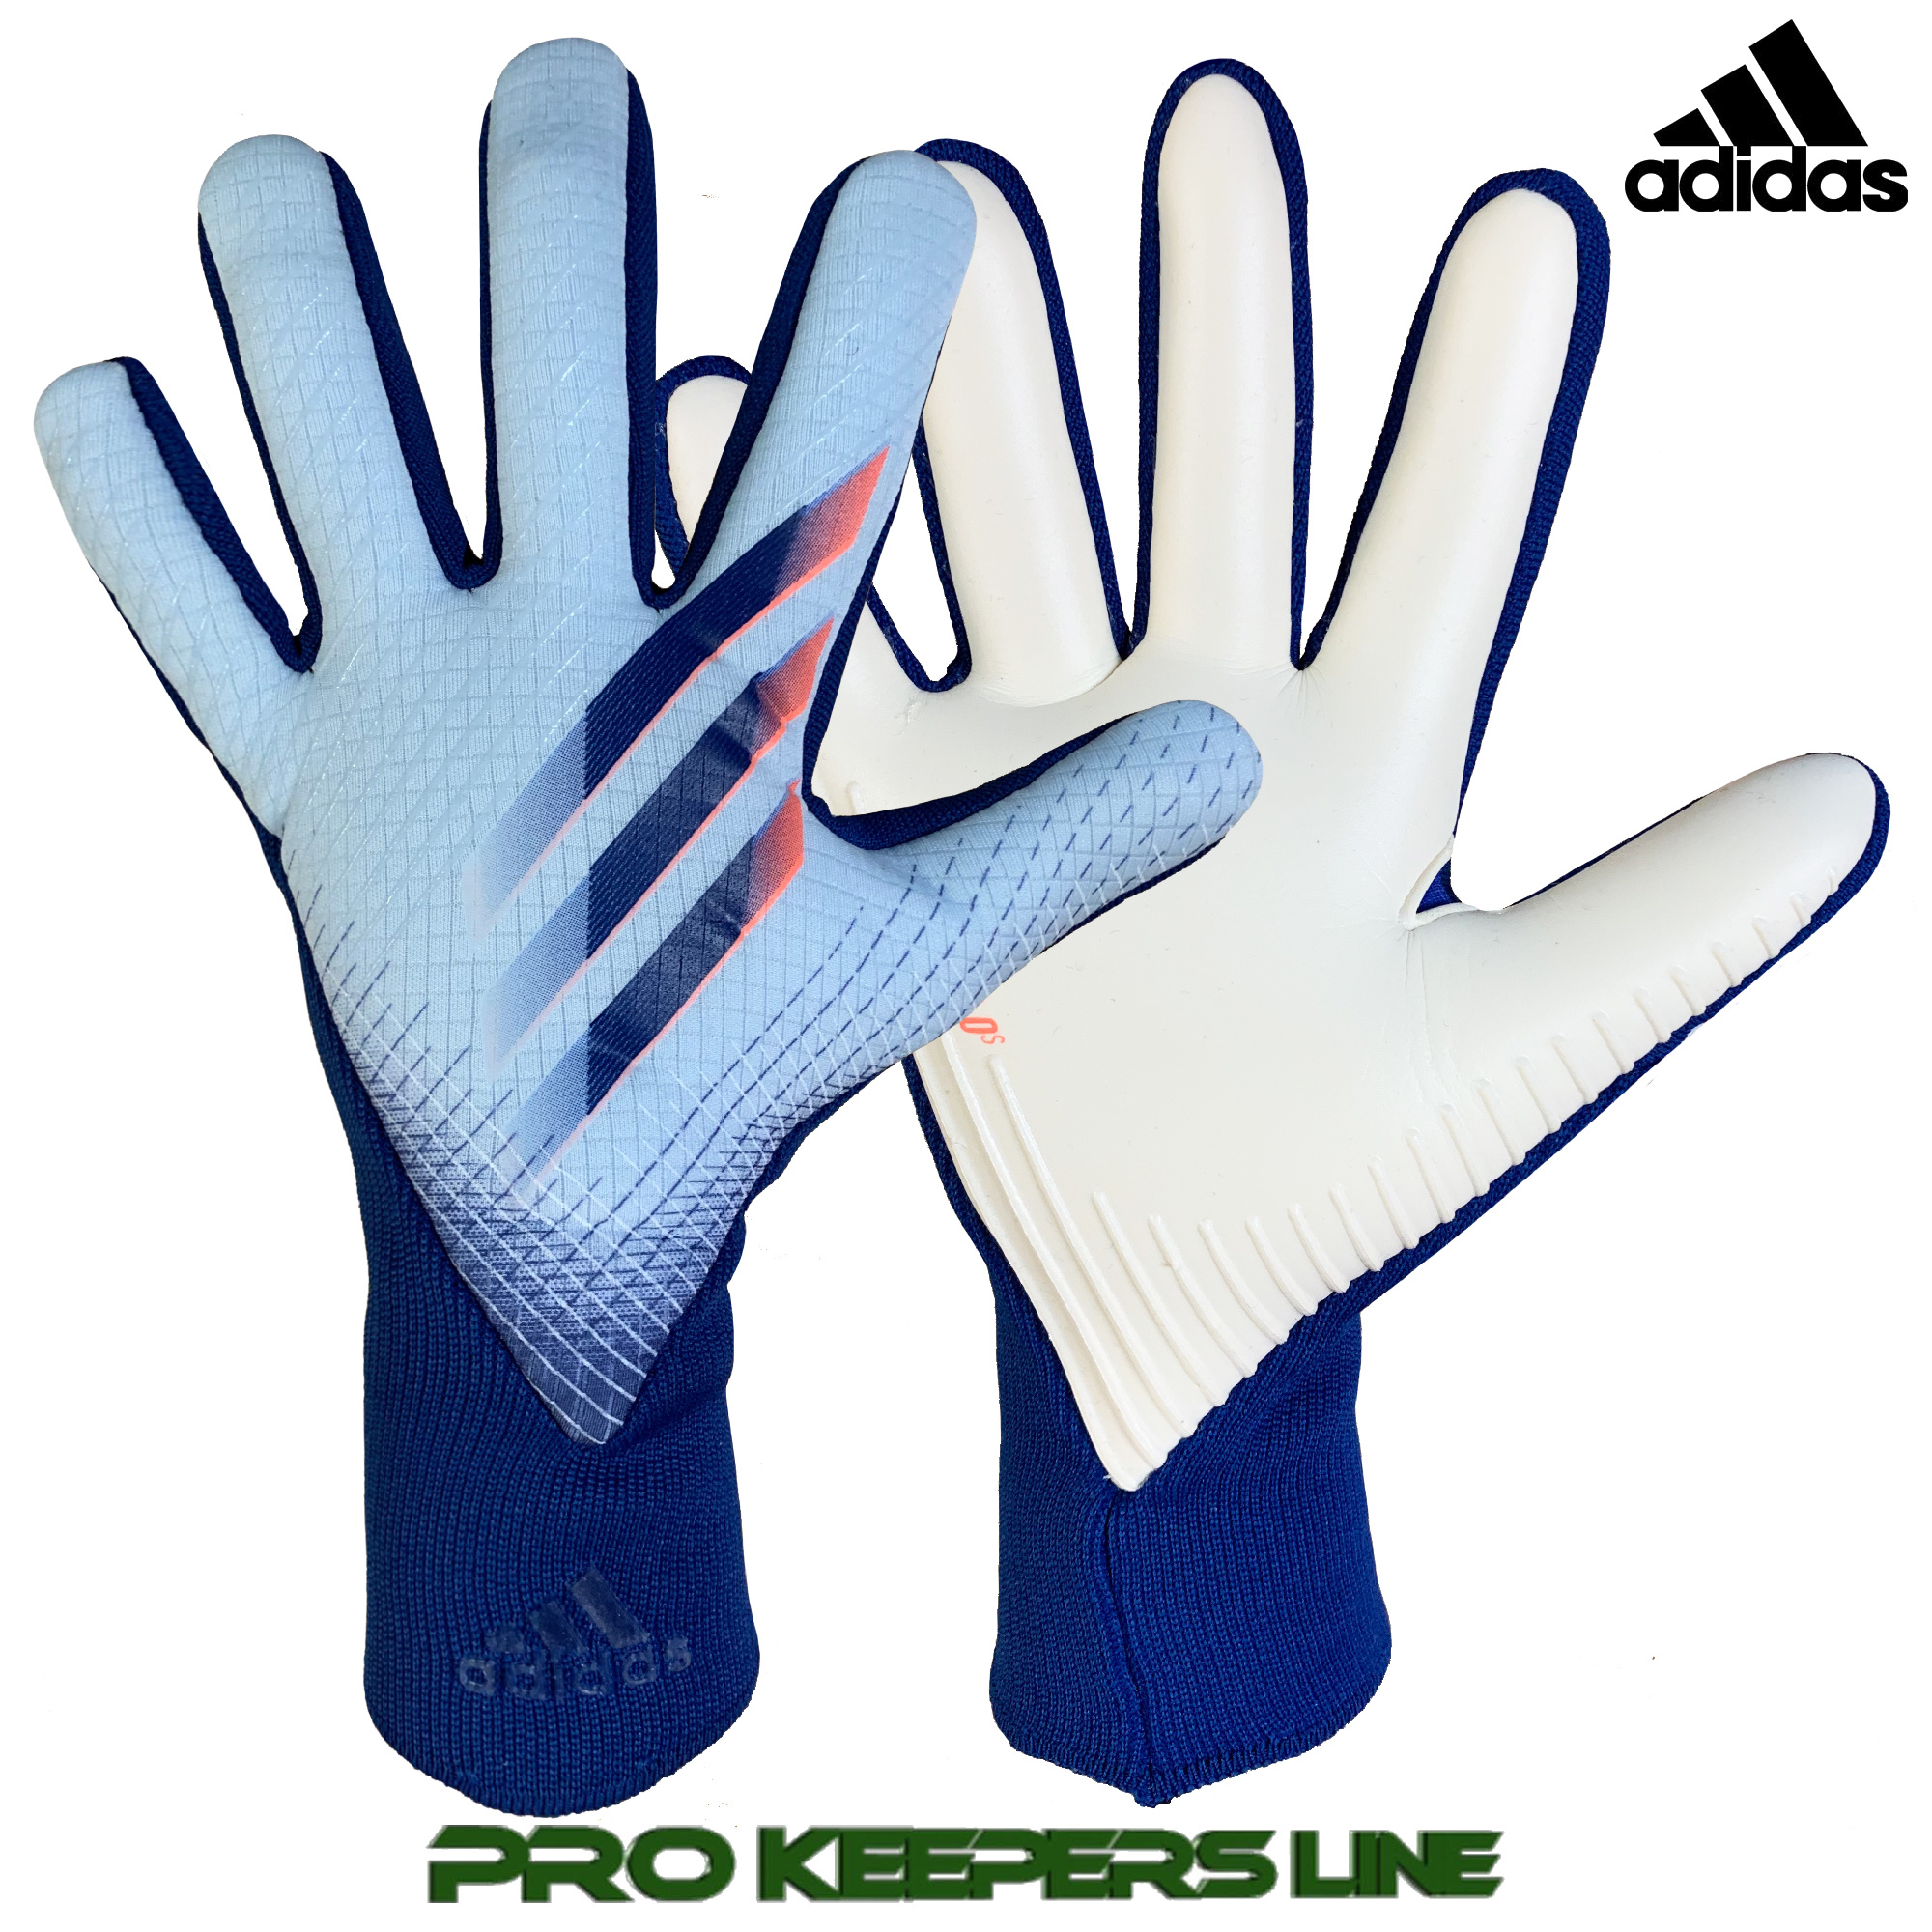 Adidas X Gl Pro Sky Tint Royal Blue Signal Coral Pro Keepers Line